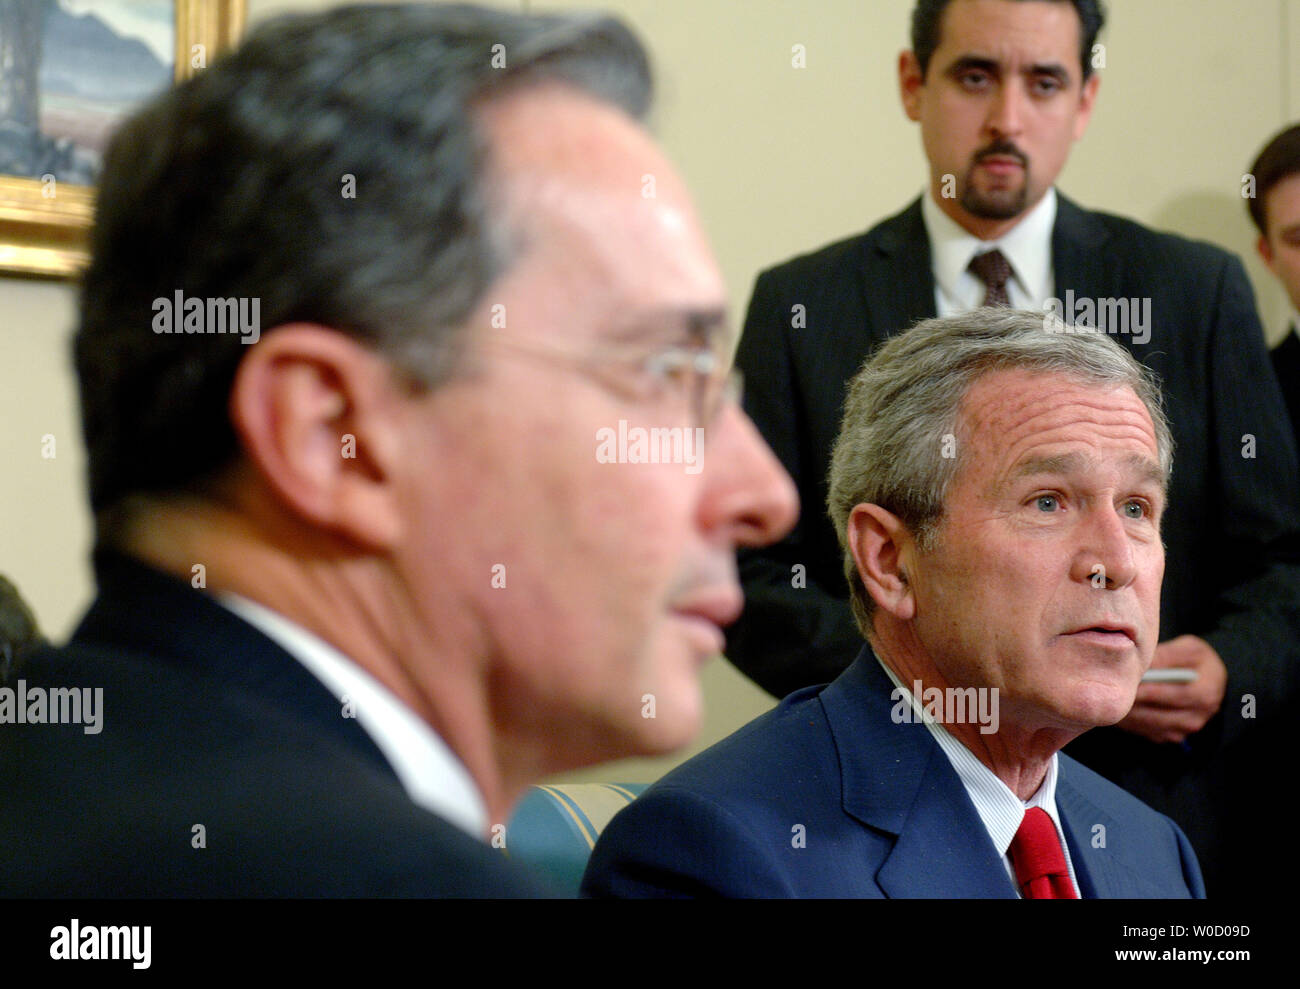 President George W. Bush (R) meets with Columbian President Alvaro Uribe in the Oval Office at the White House in Washington, February 16, 2006. (UPI Photo/Kevin Dietsch) Stock Photo